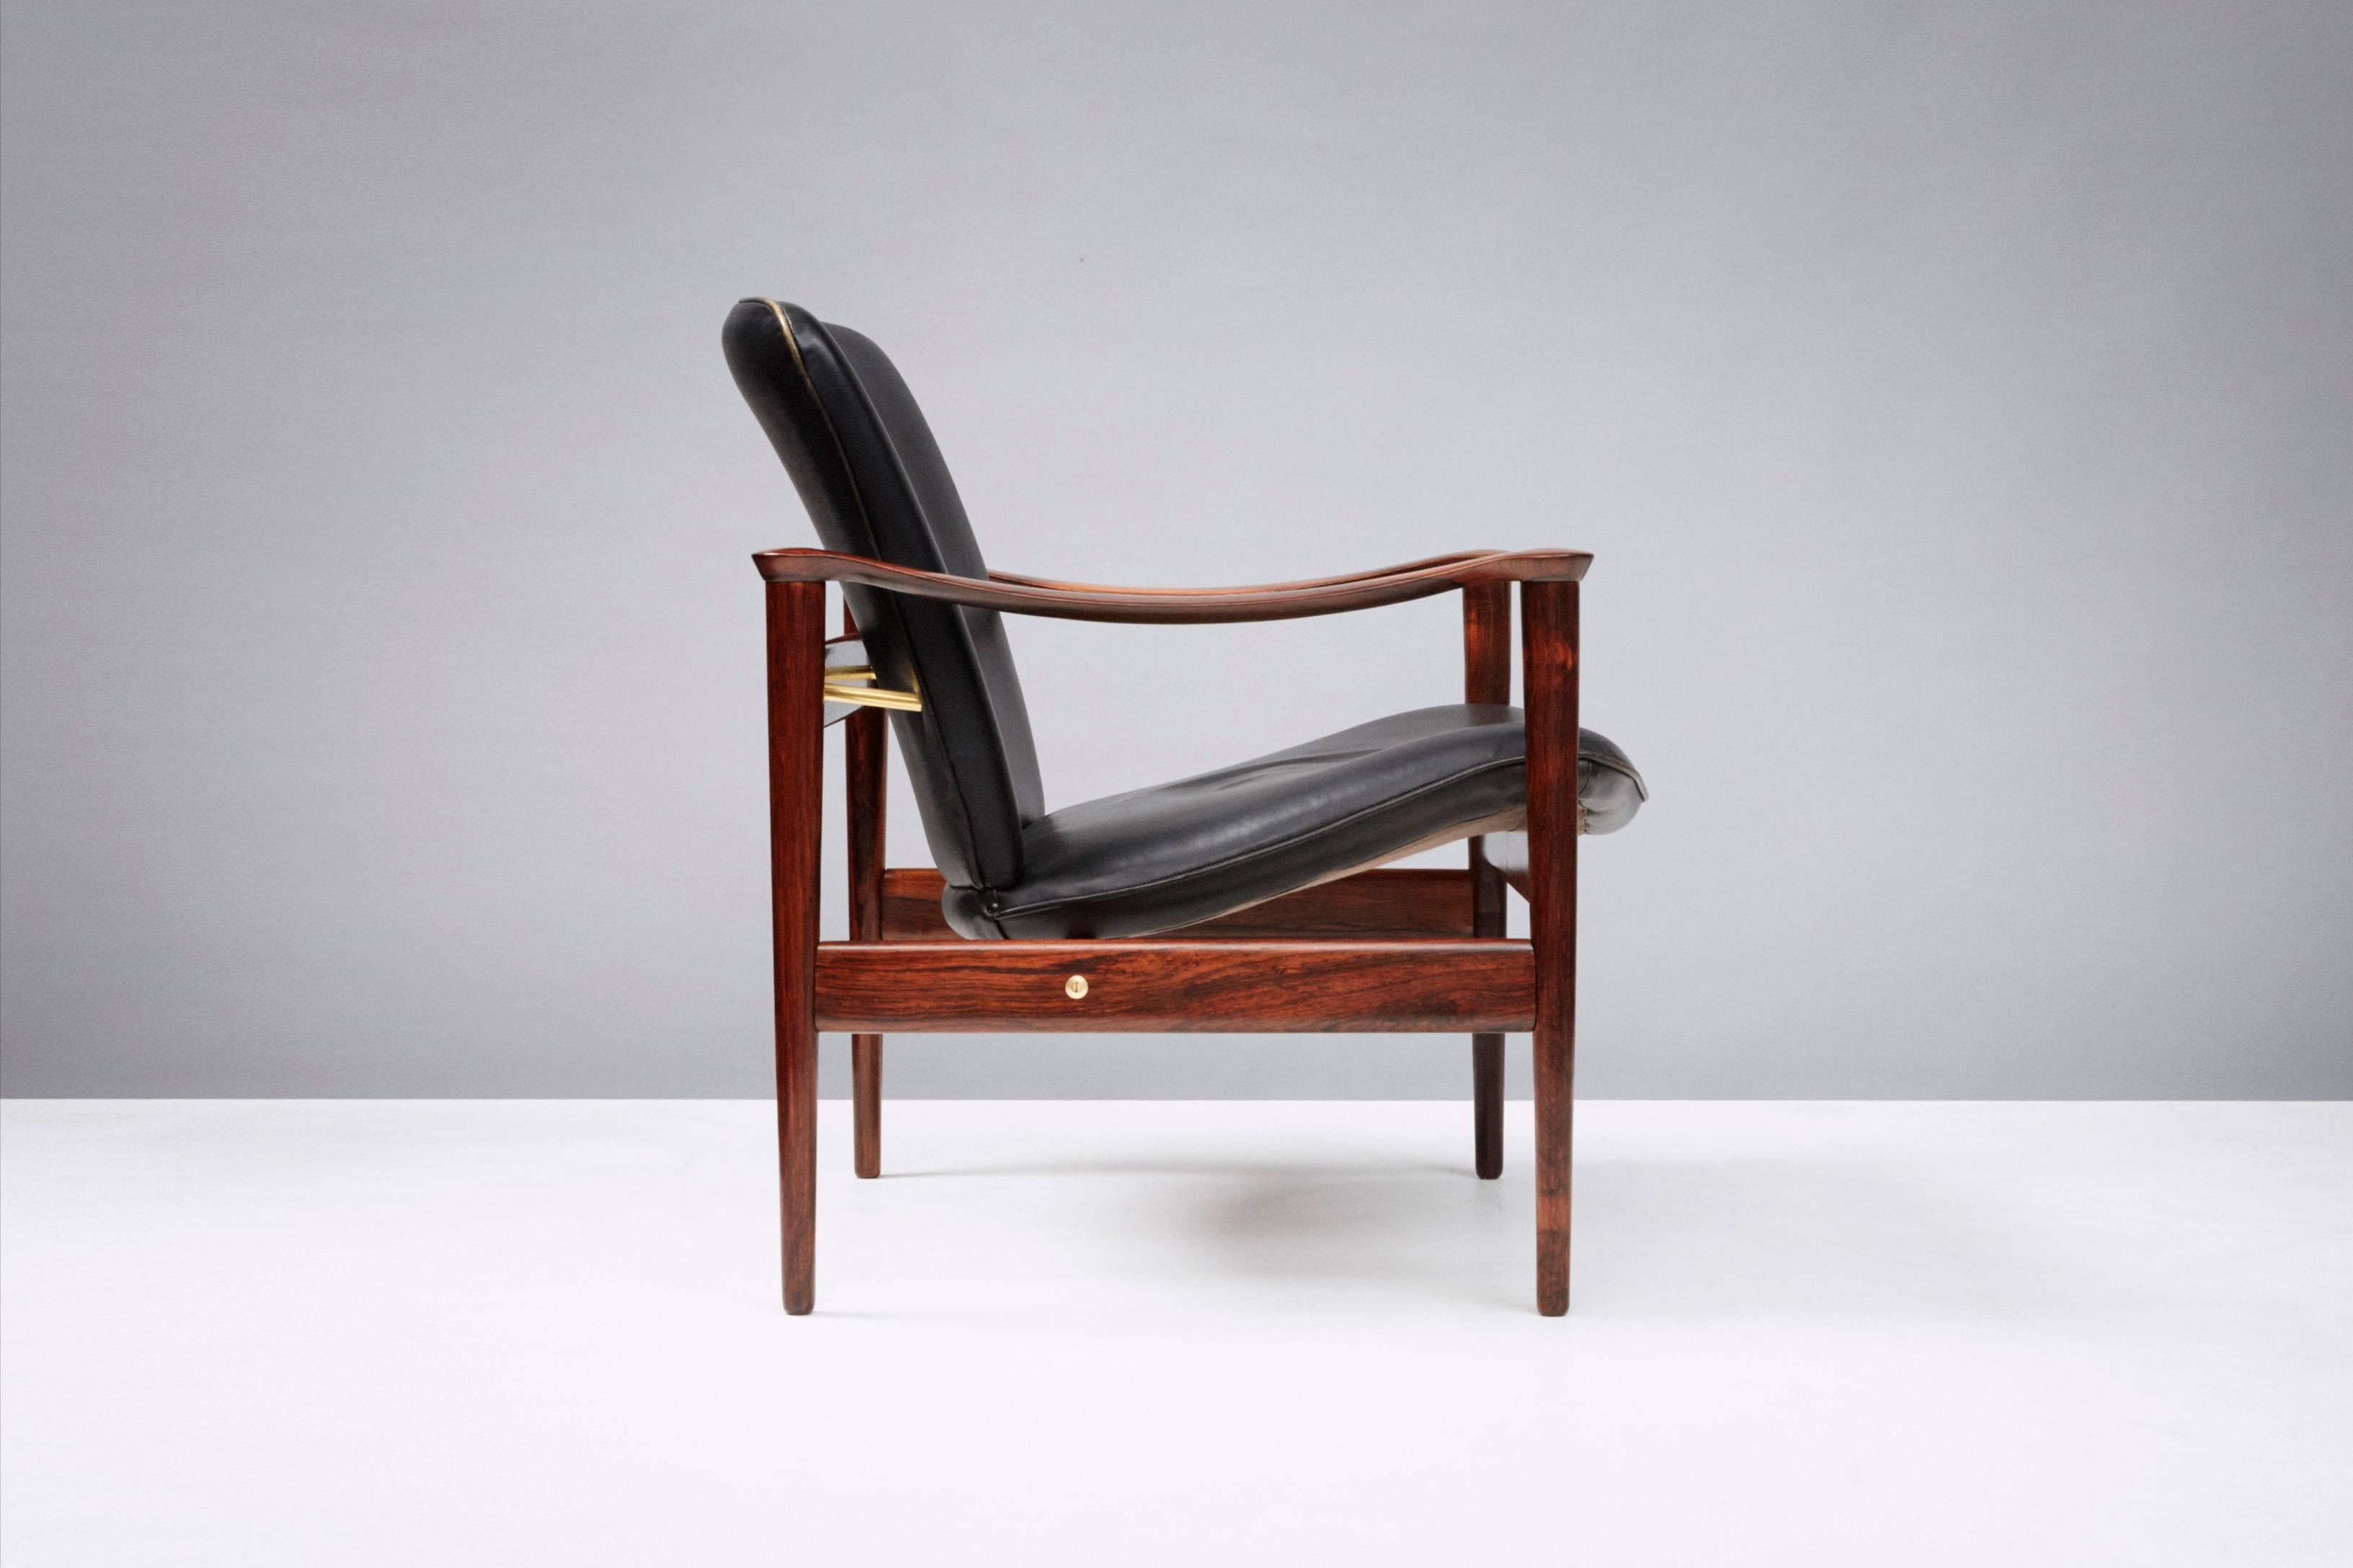 Fredrik Kayser Model 711 lounge chair, circa 1958, produced by Vatne Mobler, Norway. Brazilian rosewood frame, brass fittings and original patinated leather seat. 

